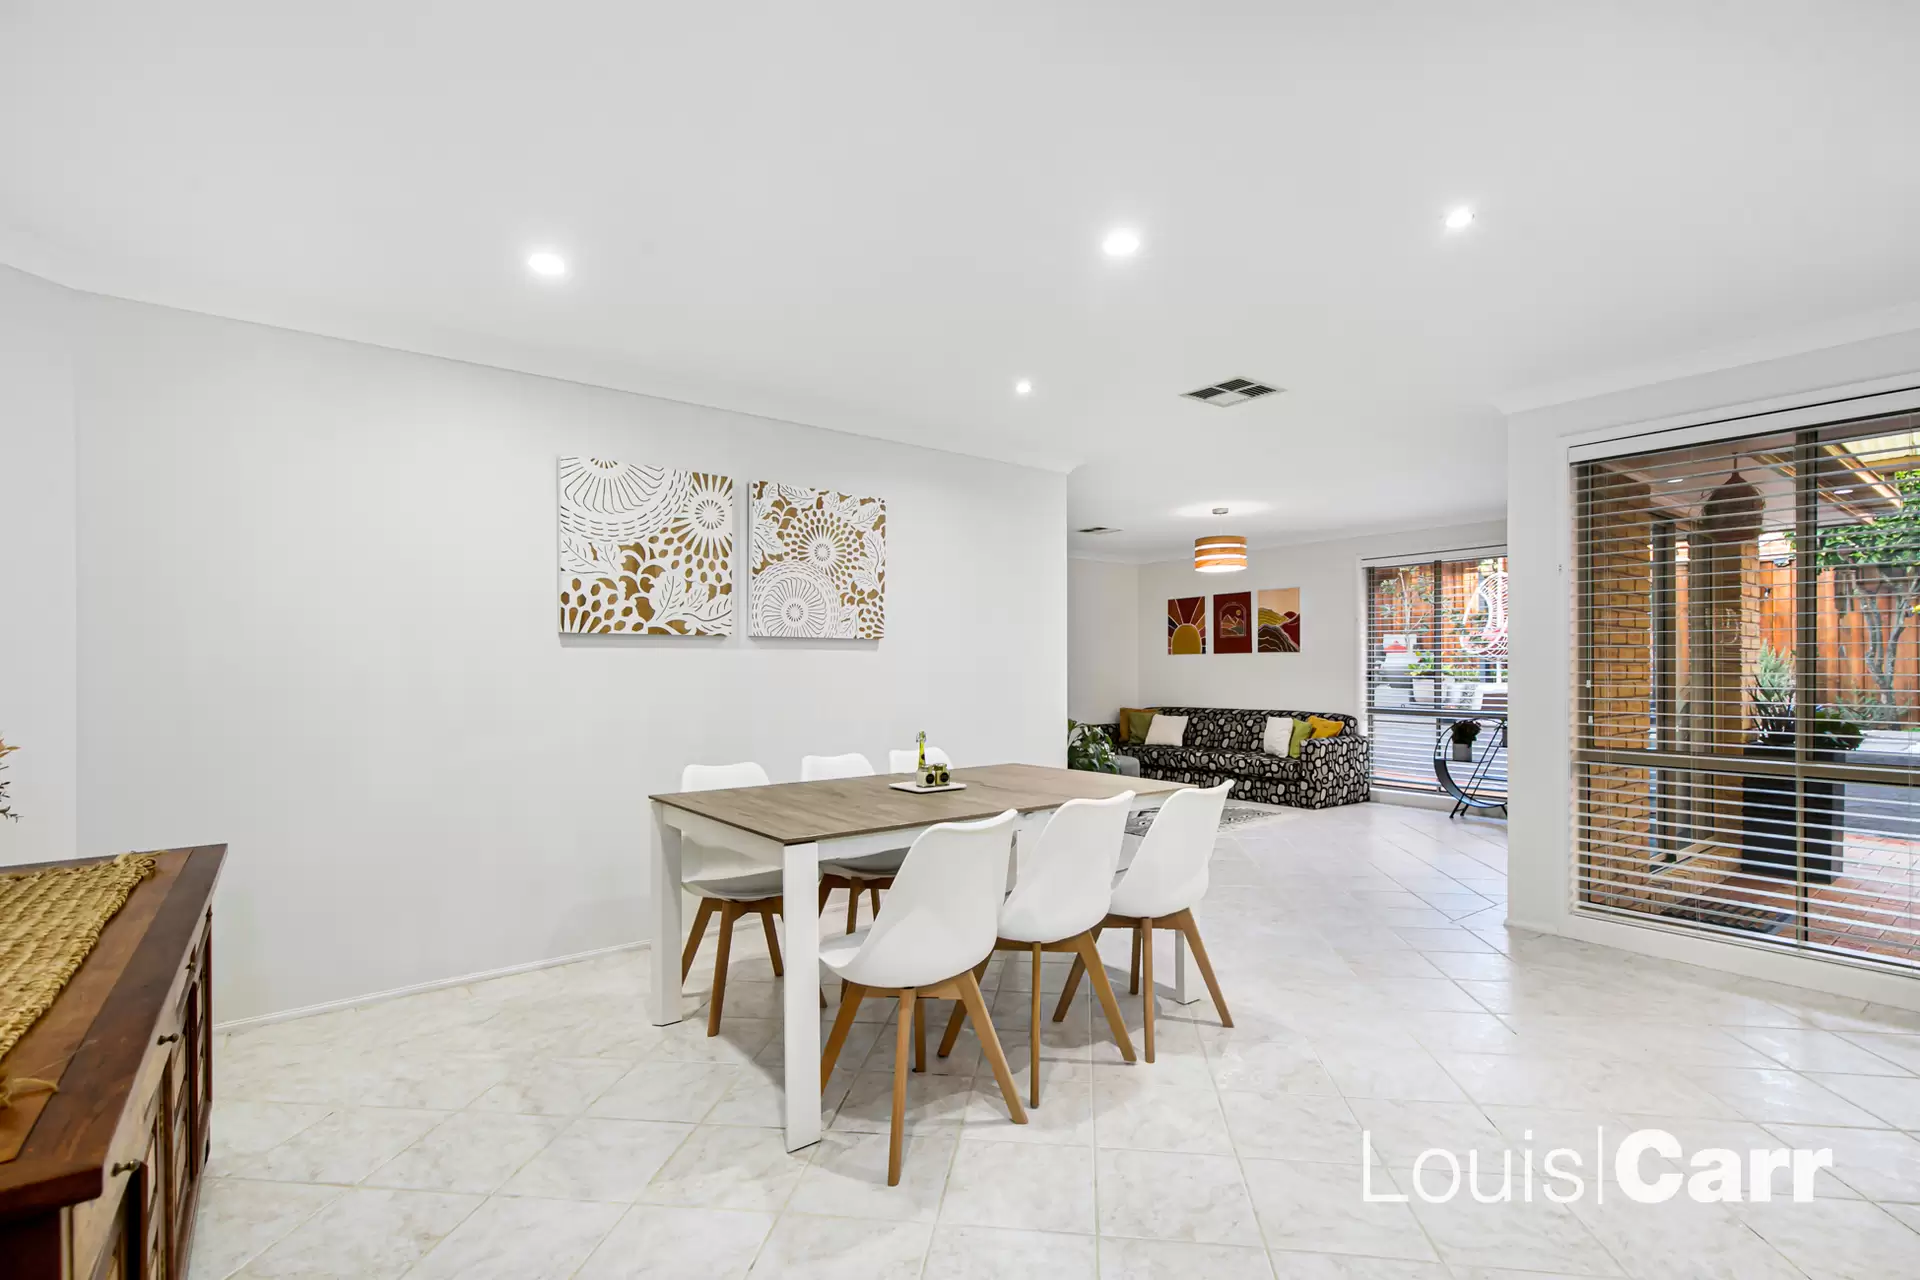 Photo #5: 16 Ridgemont Close, Cherrybrook - Sold by Louis Carr Real Estate